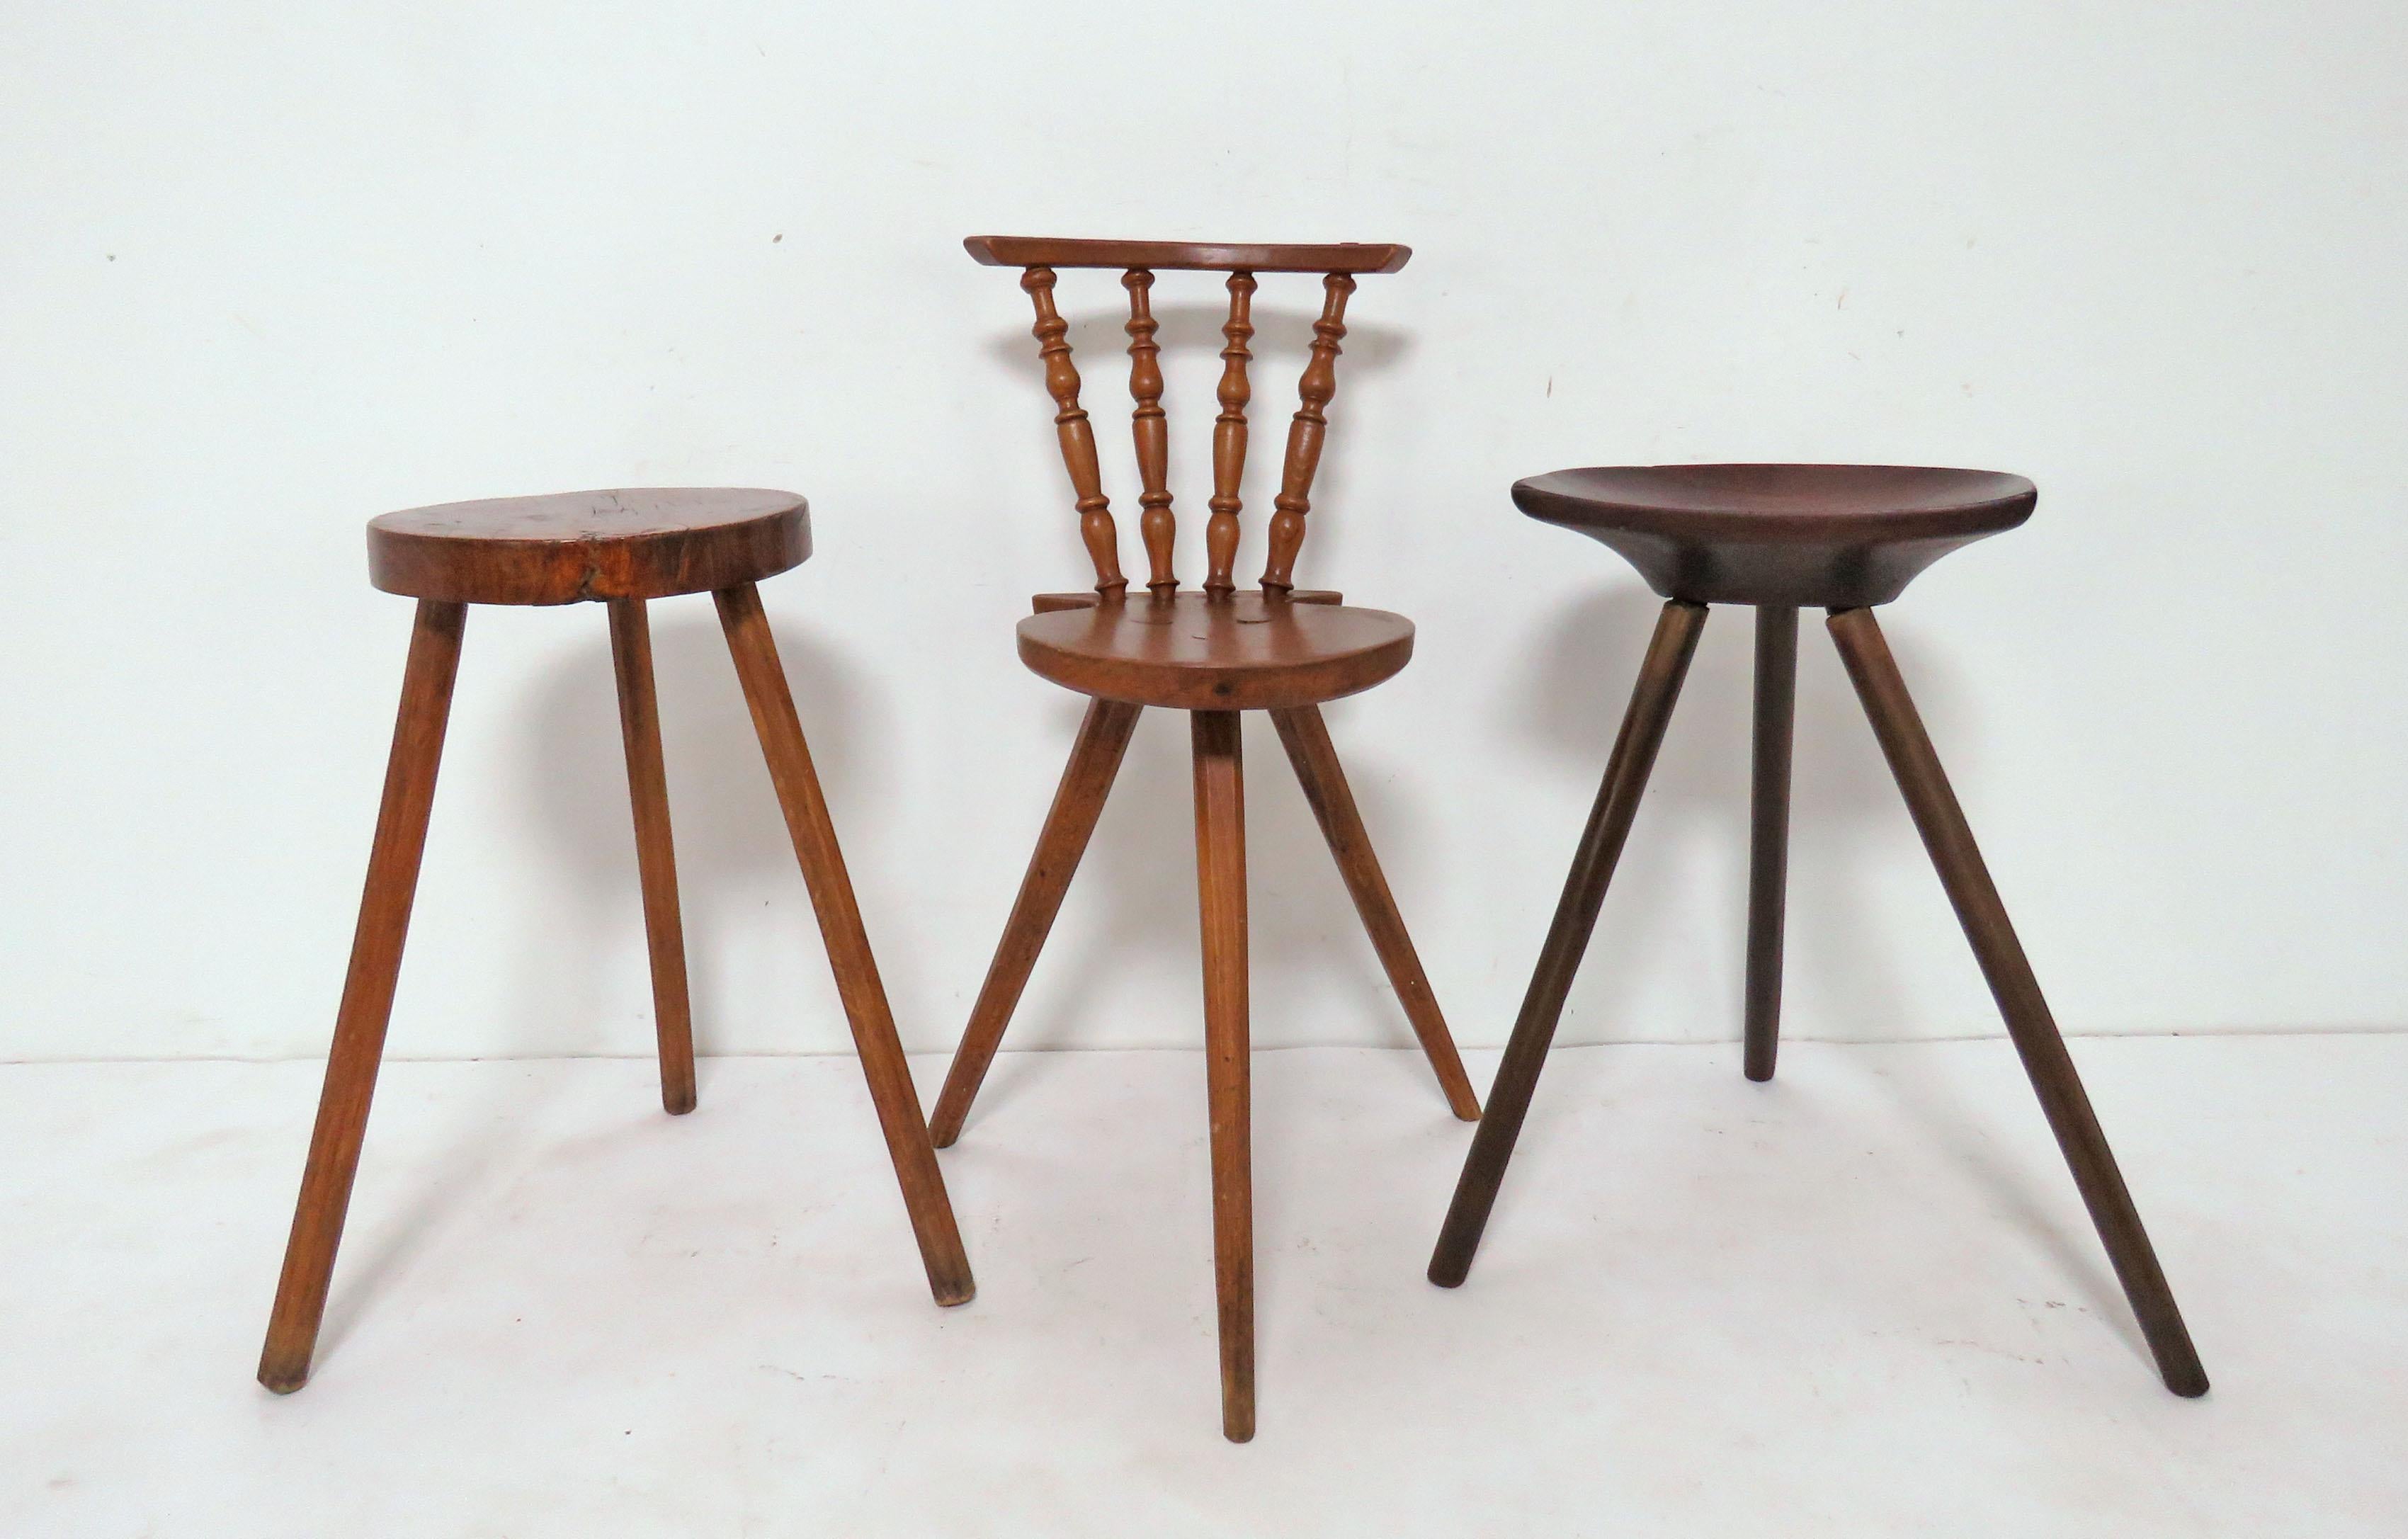 An assorted collection of handmade primitive stools with tripod legs, circa 19th and 20th century. Included is a walnut live edge stool circa 1870s, seat made from a slice of trunk; a wonderful Windsor back fashioned of chestnut circa mid-19th